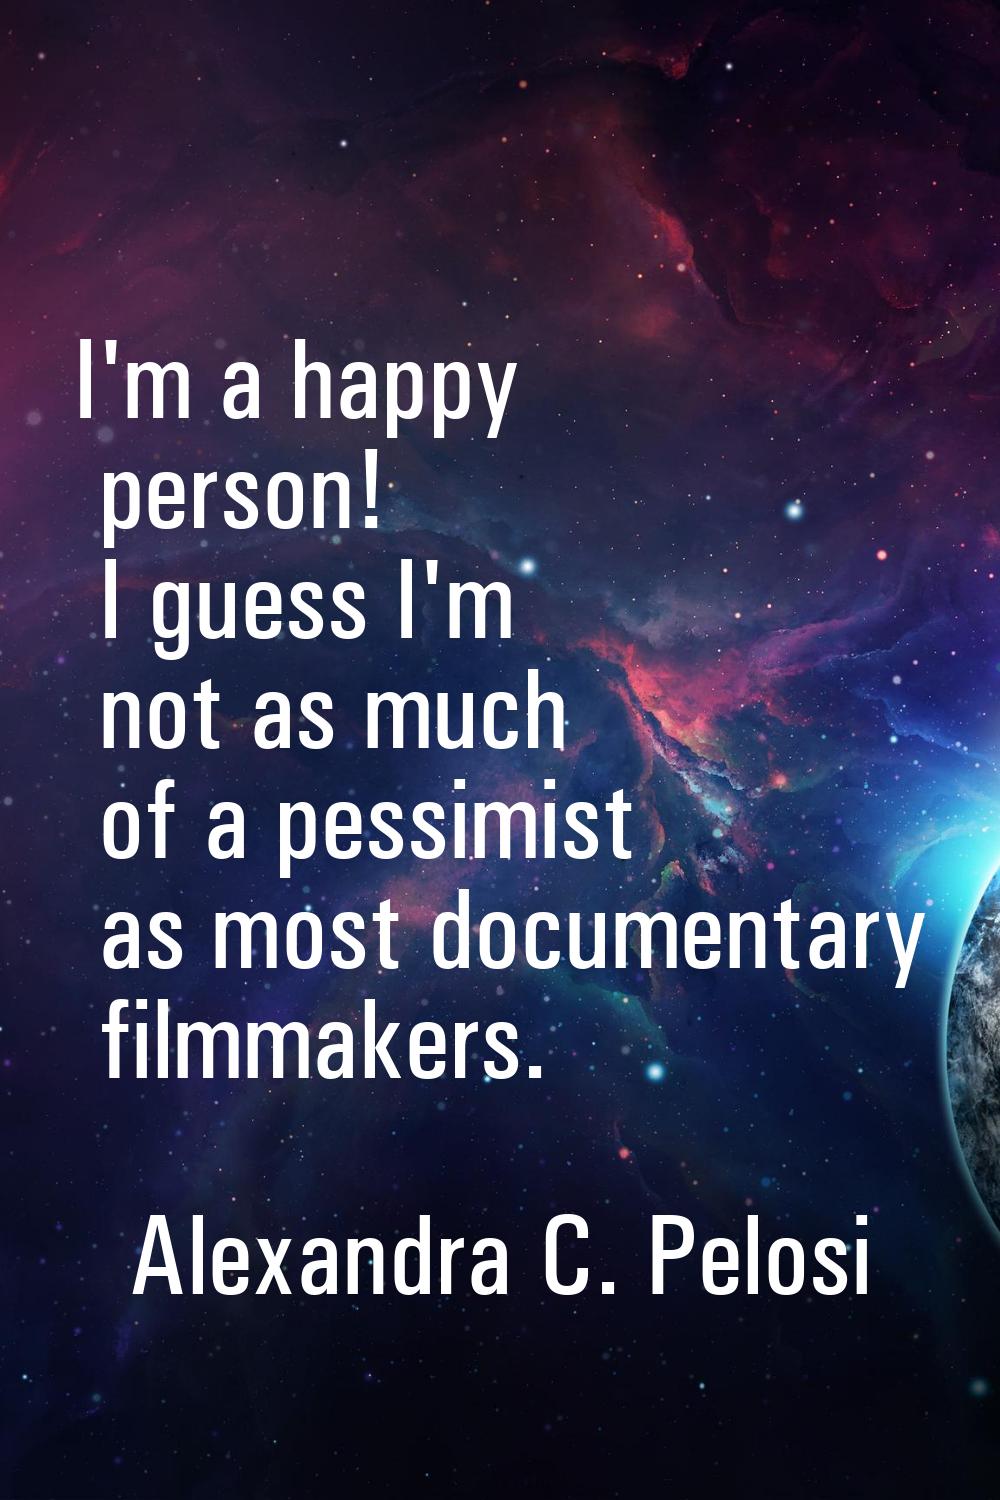 I'm a happy person! I guess I'm not as much of a pessimist as most documentary filmmakers.